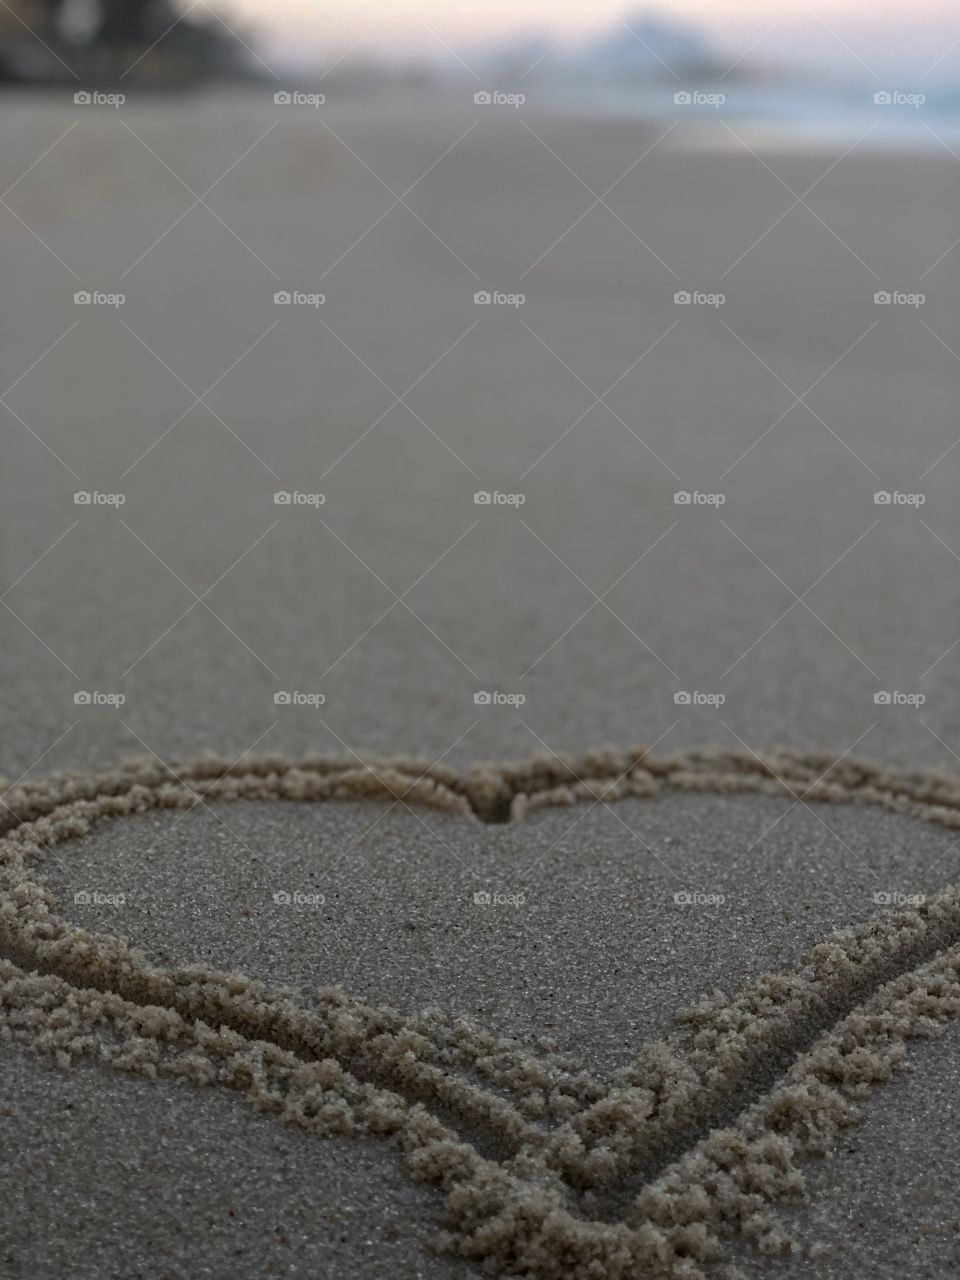 A heart drawn on the sand of a beautiful beach